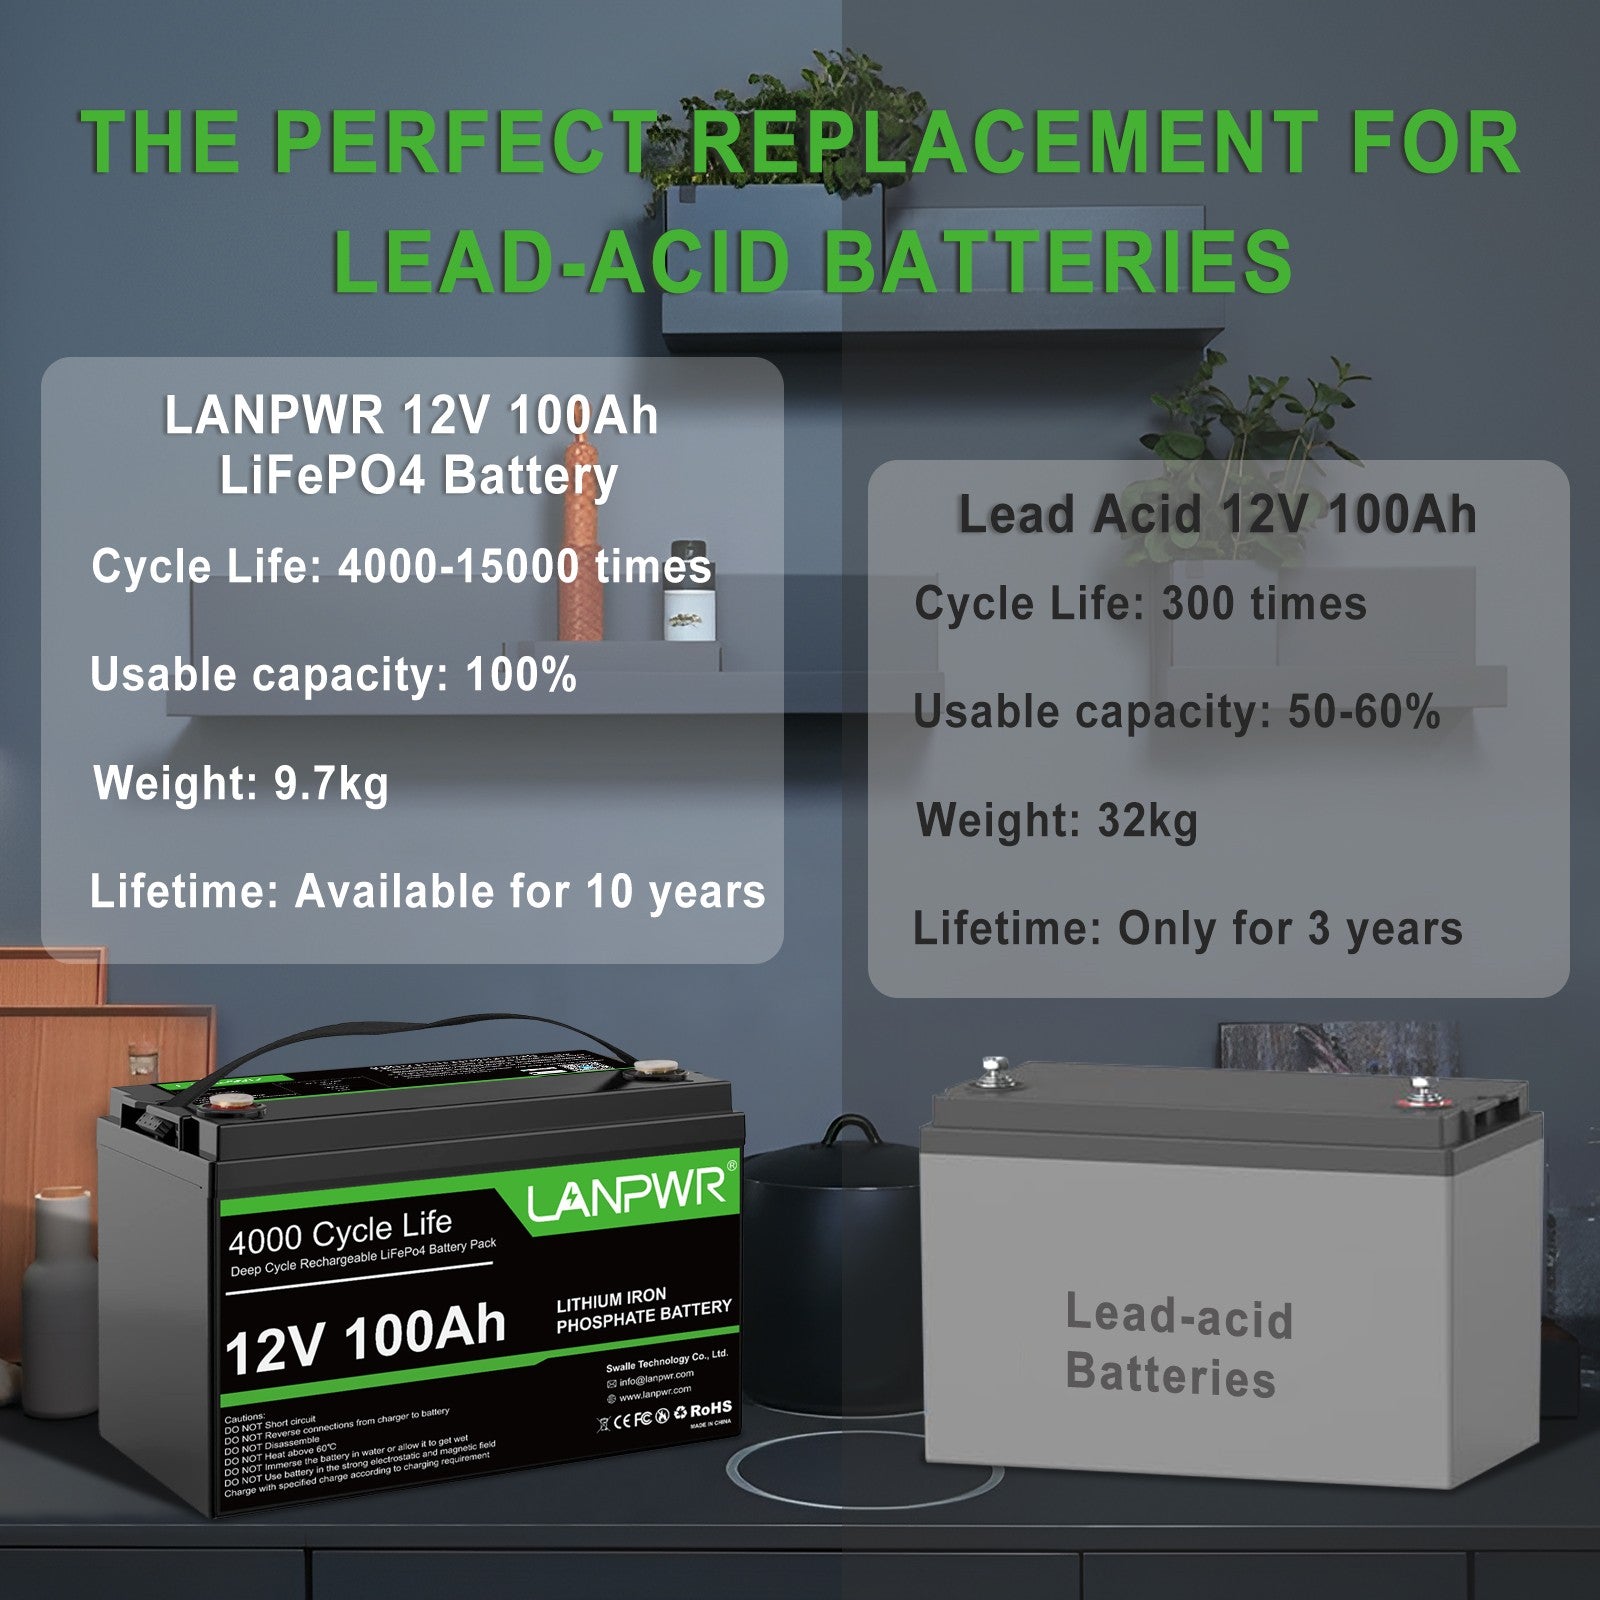 LANPWR 12V 100Ah LiFePO4 Battery with Bluetooth 5.0, 4000+ Deep Cycle Lithium Battery